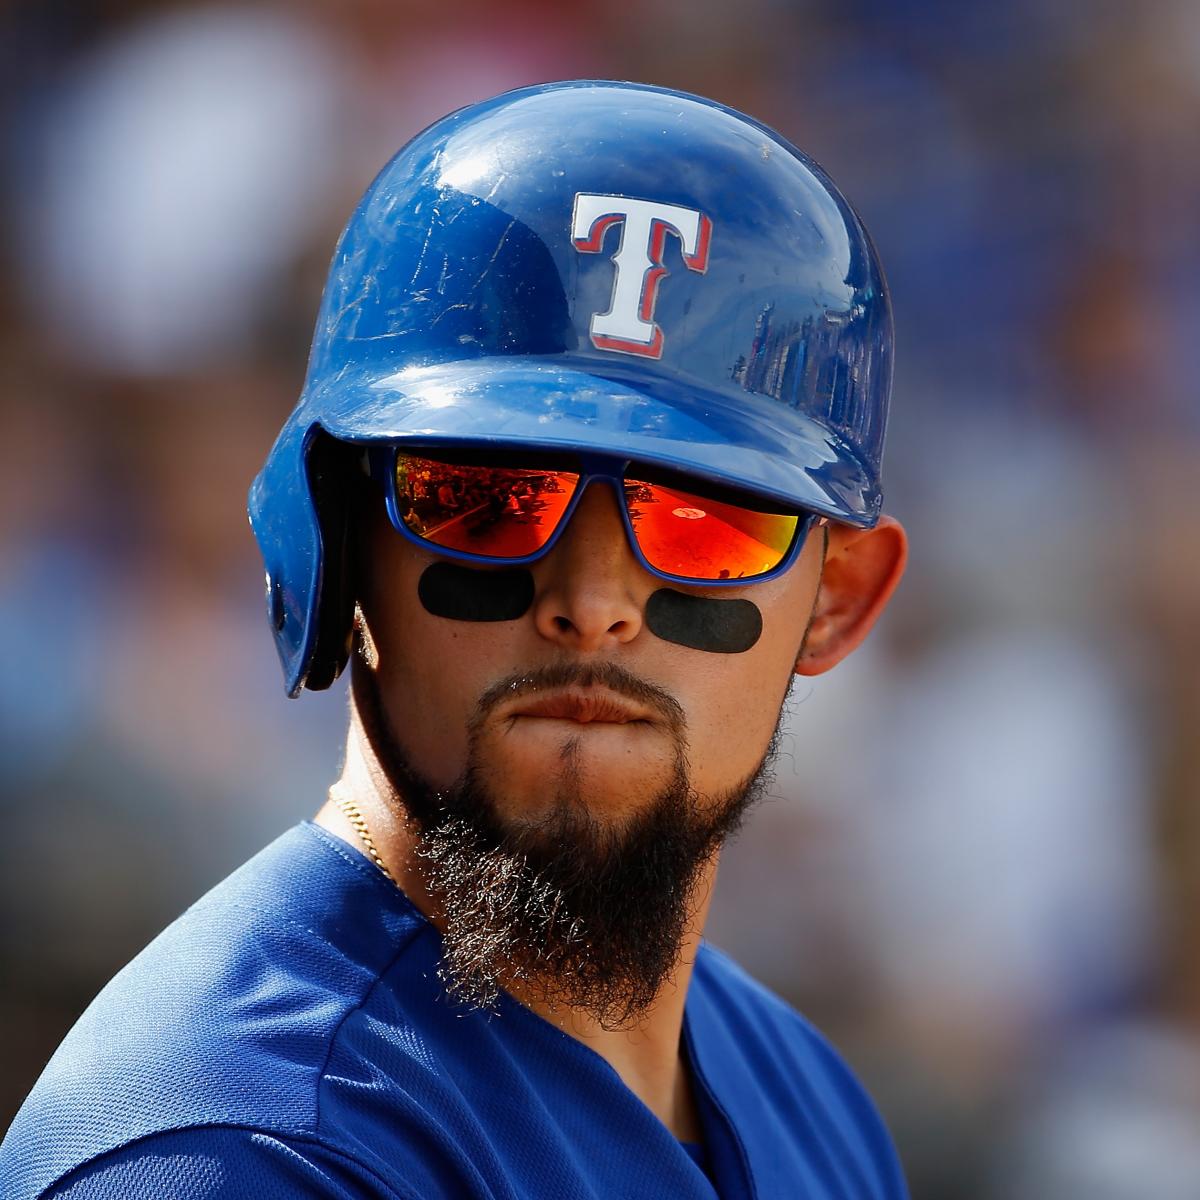 Rougned Odor could lose everyday role